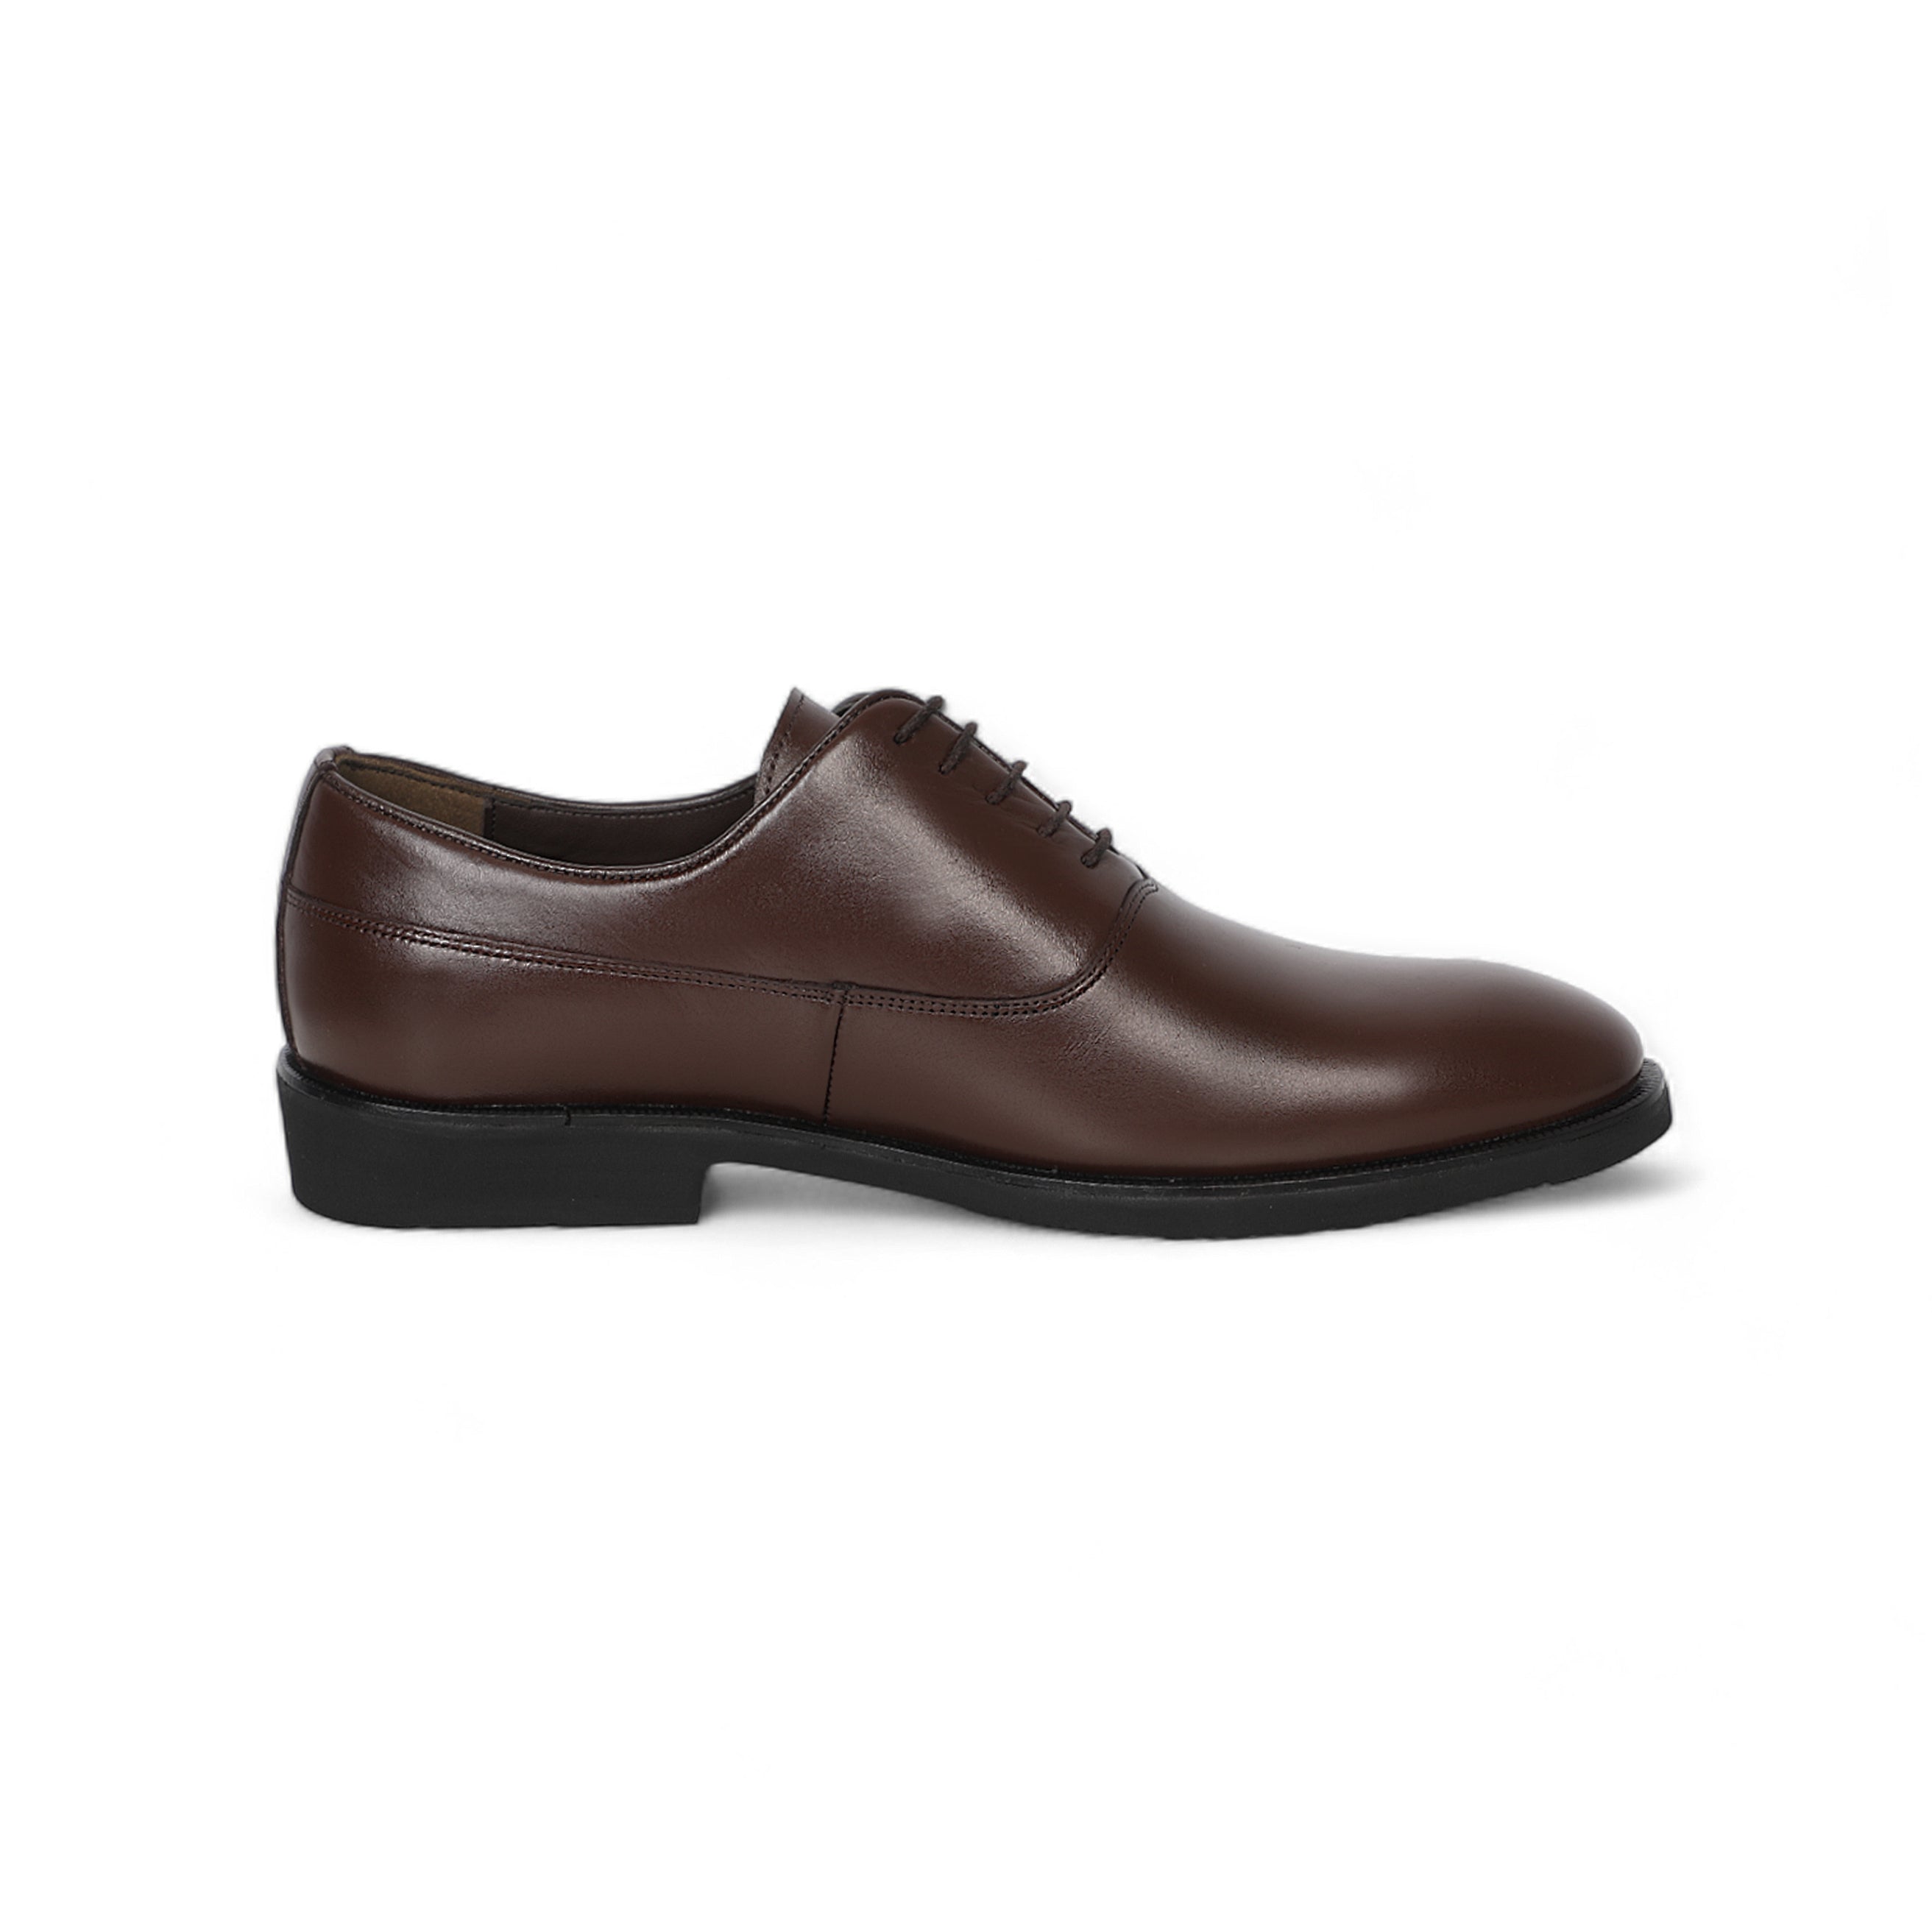 Classic Men Brown Shoes Solid With Lace-Up